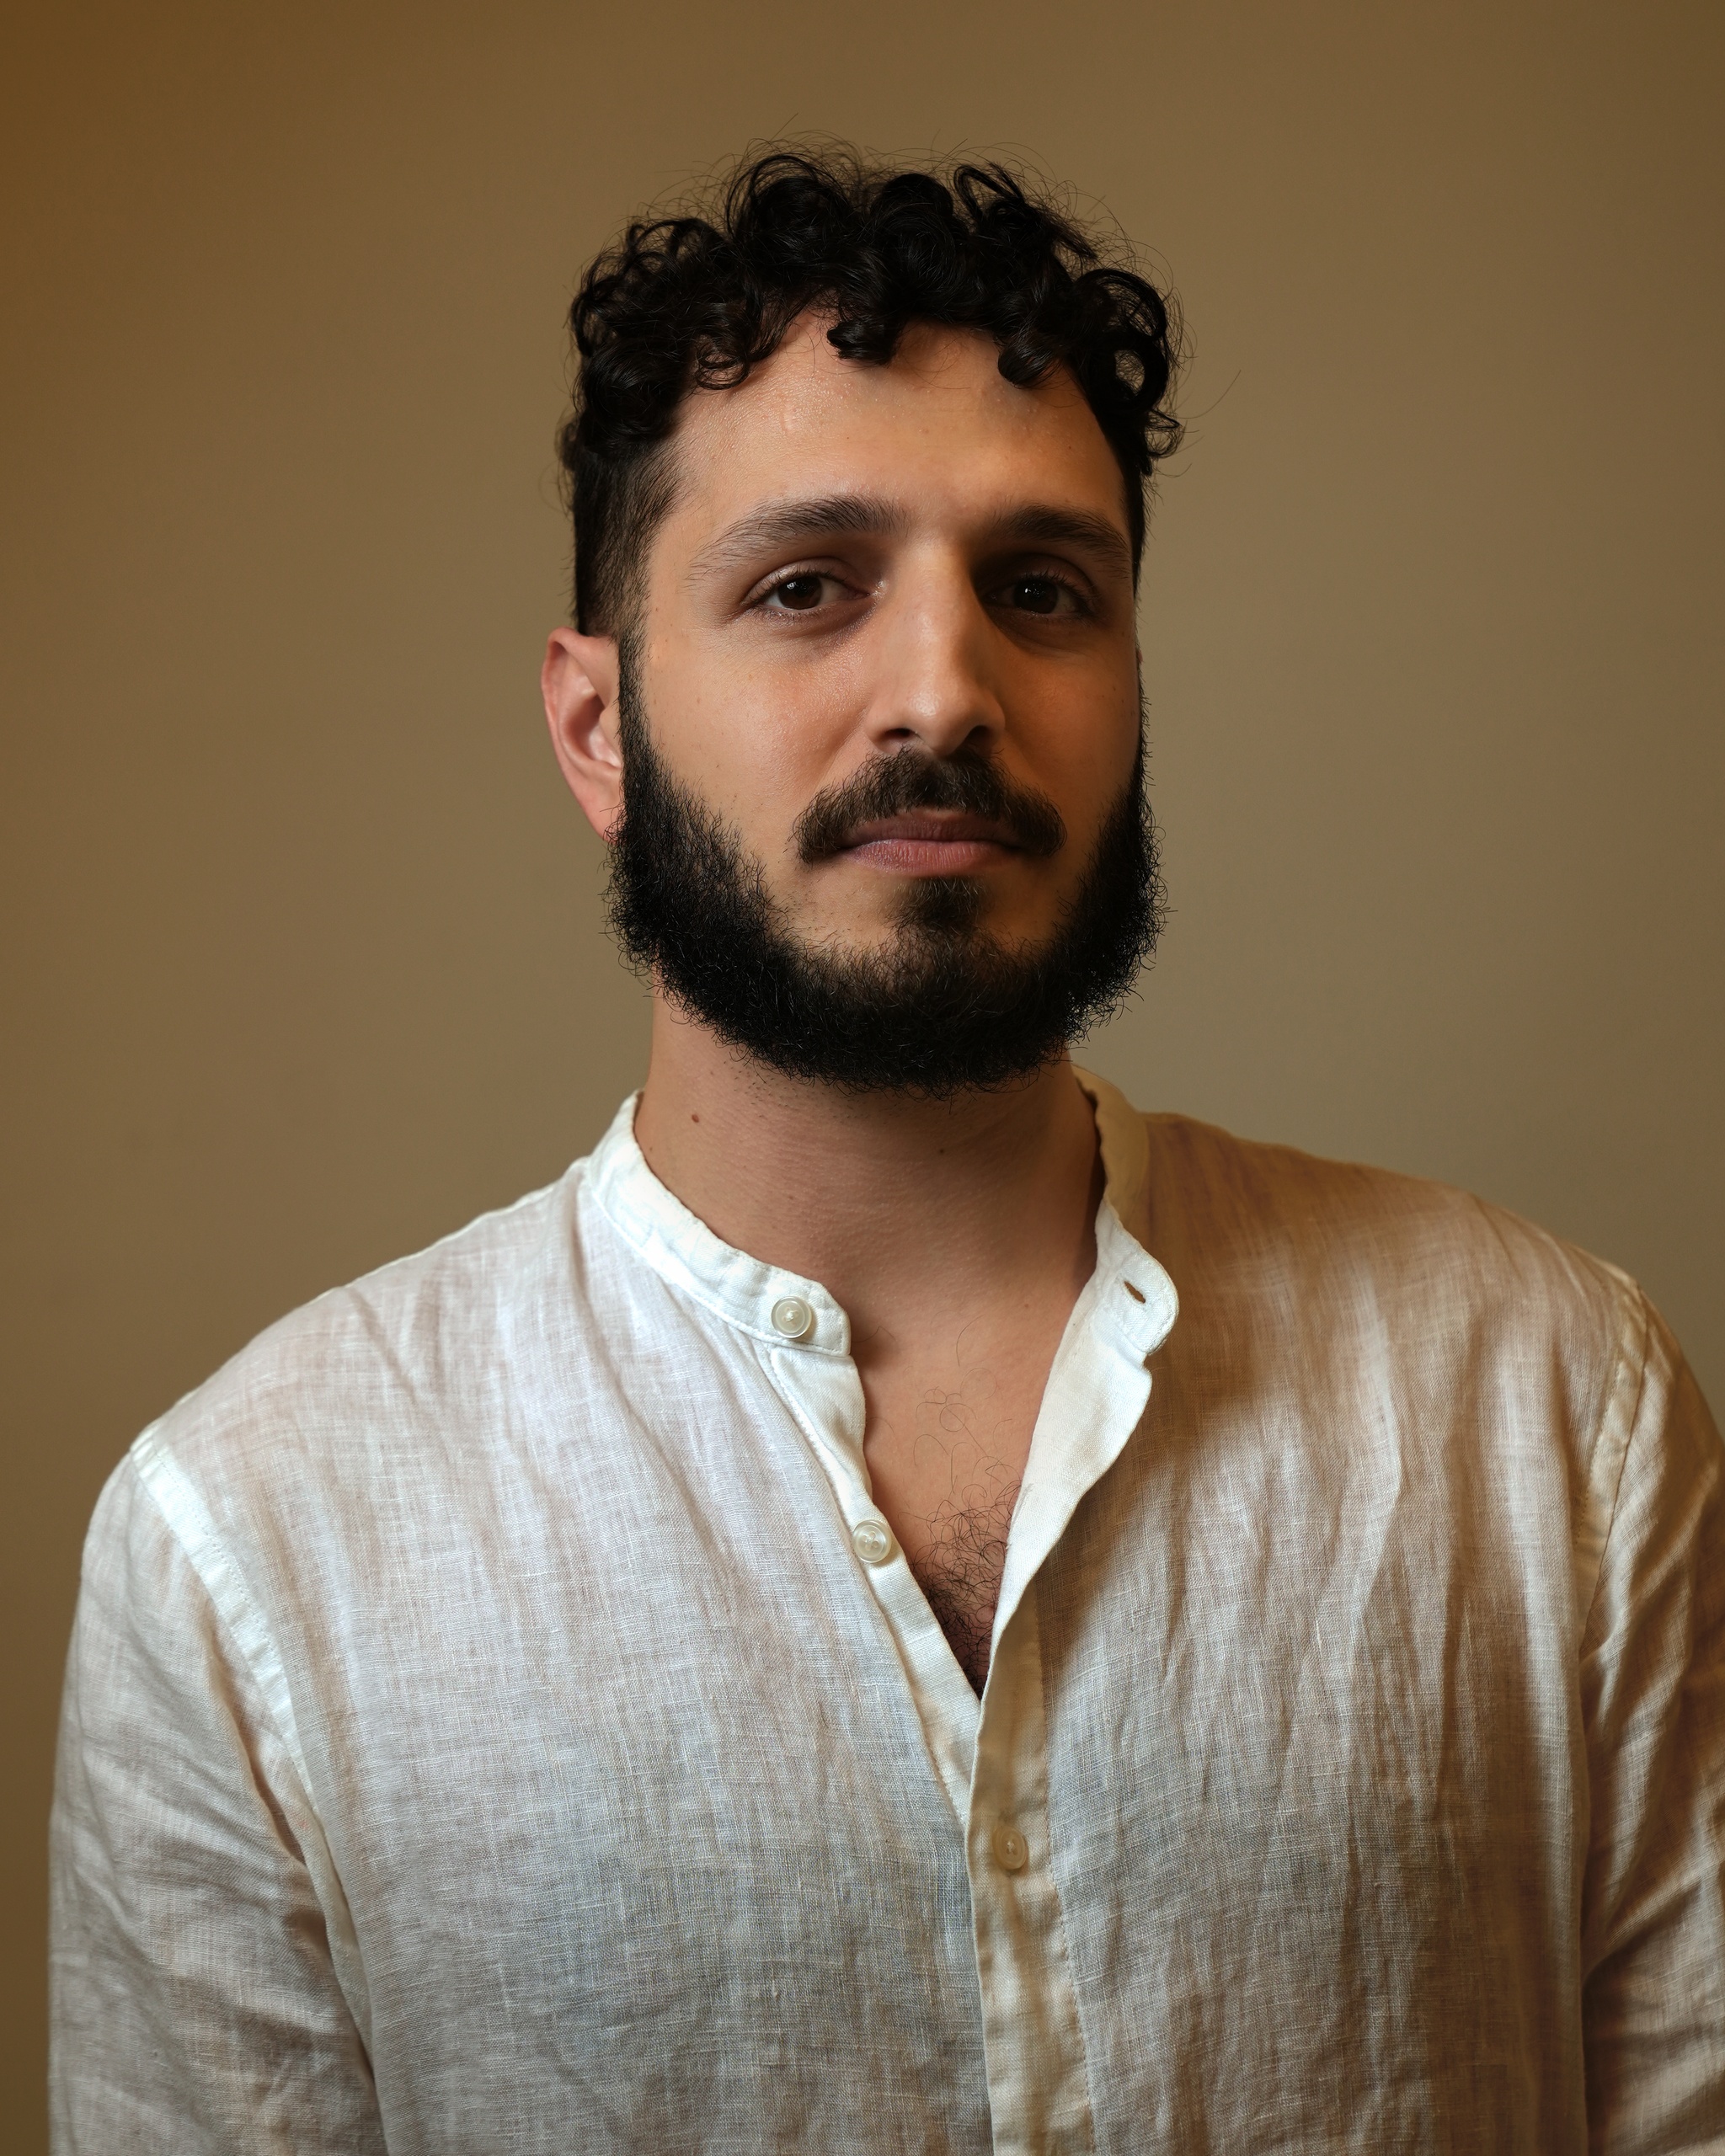 A portrait of Waseem Alzer against a neutral brown background. Waseem wears a white shirt with the top buttons undone. He has short curly hair, a dark beard, and looks directly at us. 